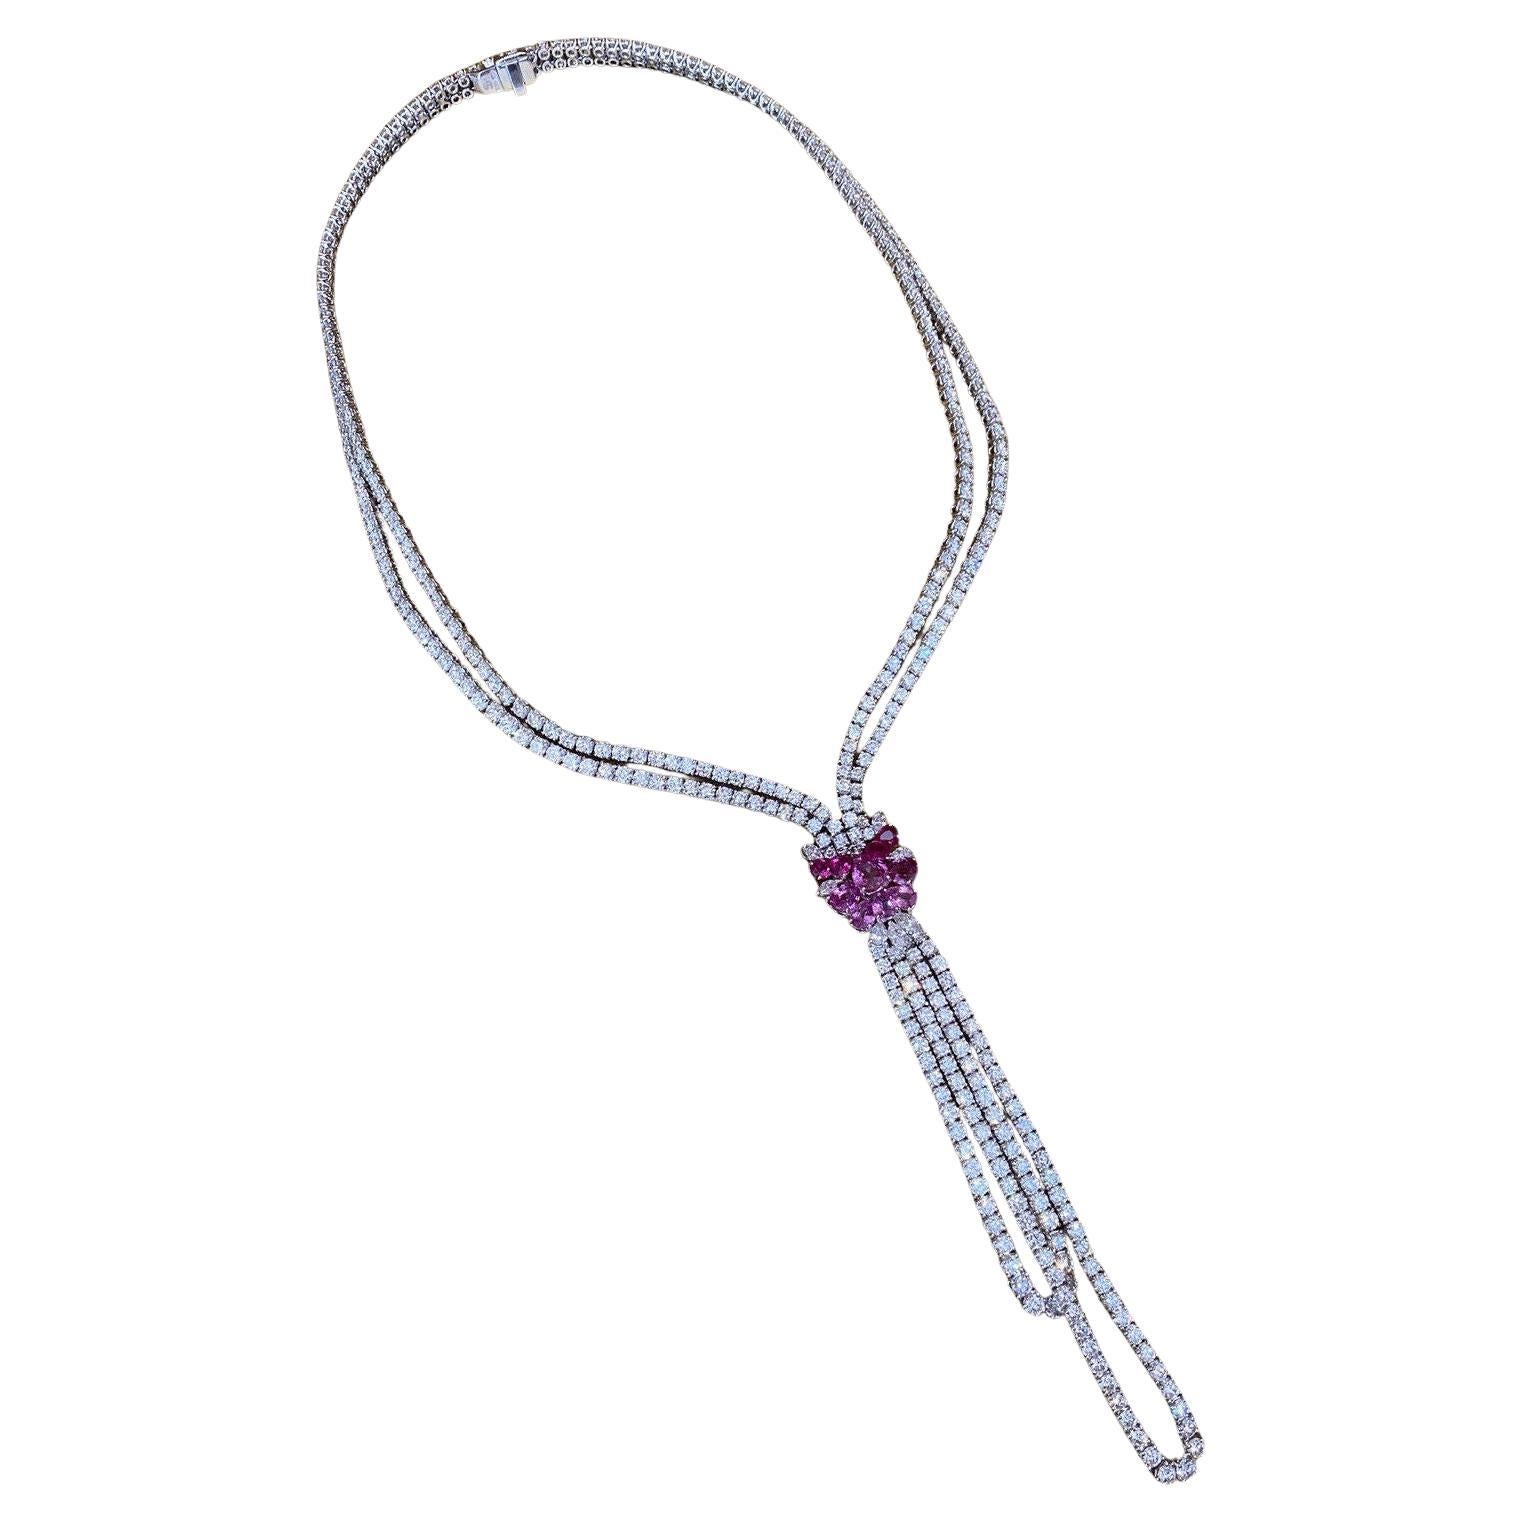 Stefan Hafner Y Diamond Necklace with Pink Sapphires in 18k White Gold